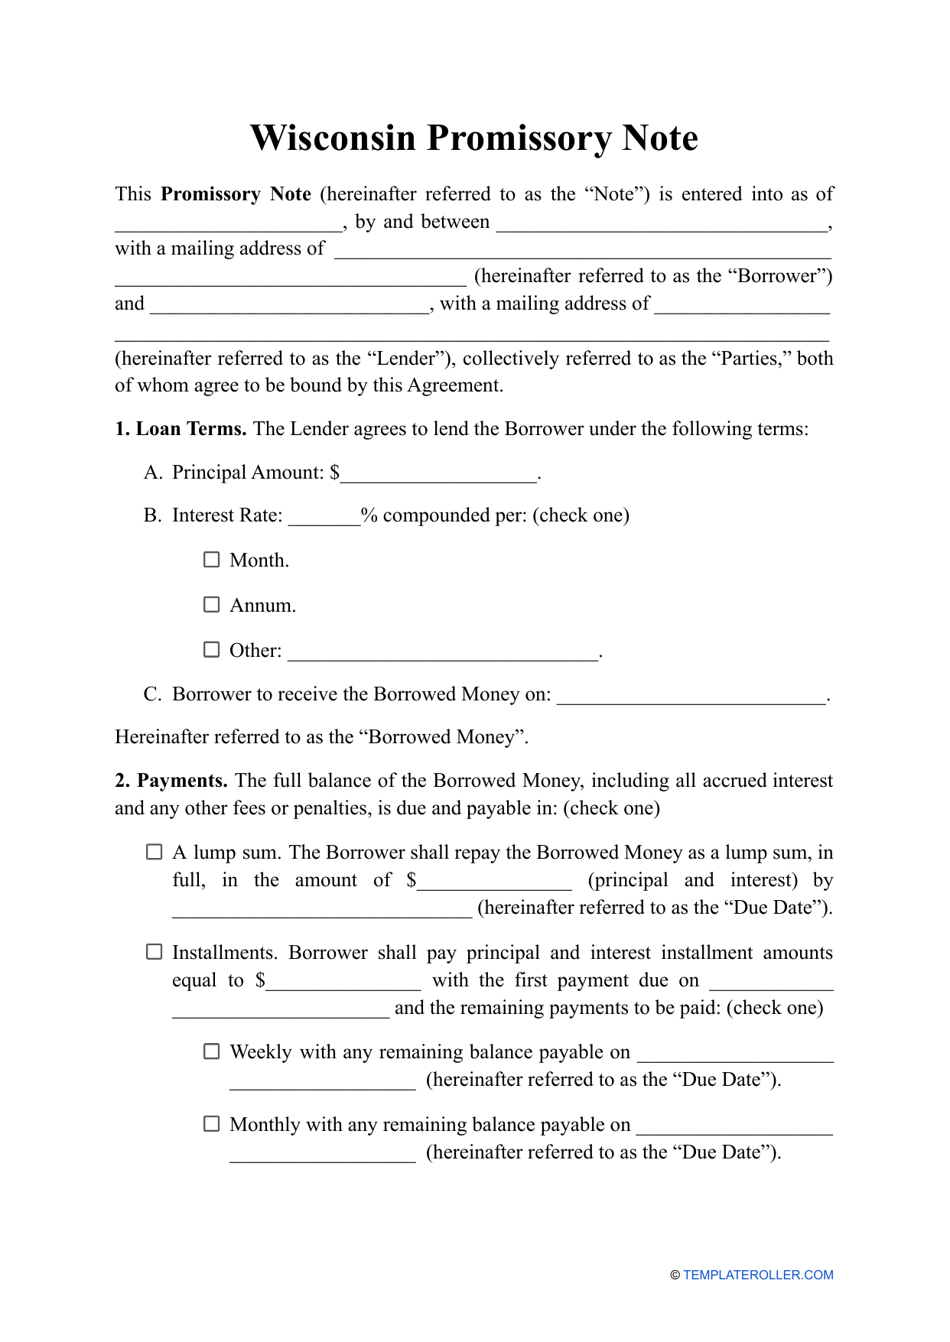 Wisconsin Promissory Note Template Fill Out Sign Online And Download Pdf Templateroller 0237